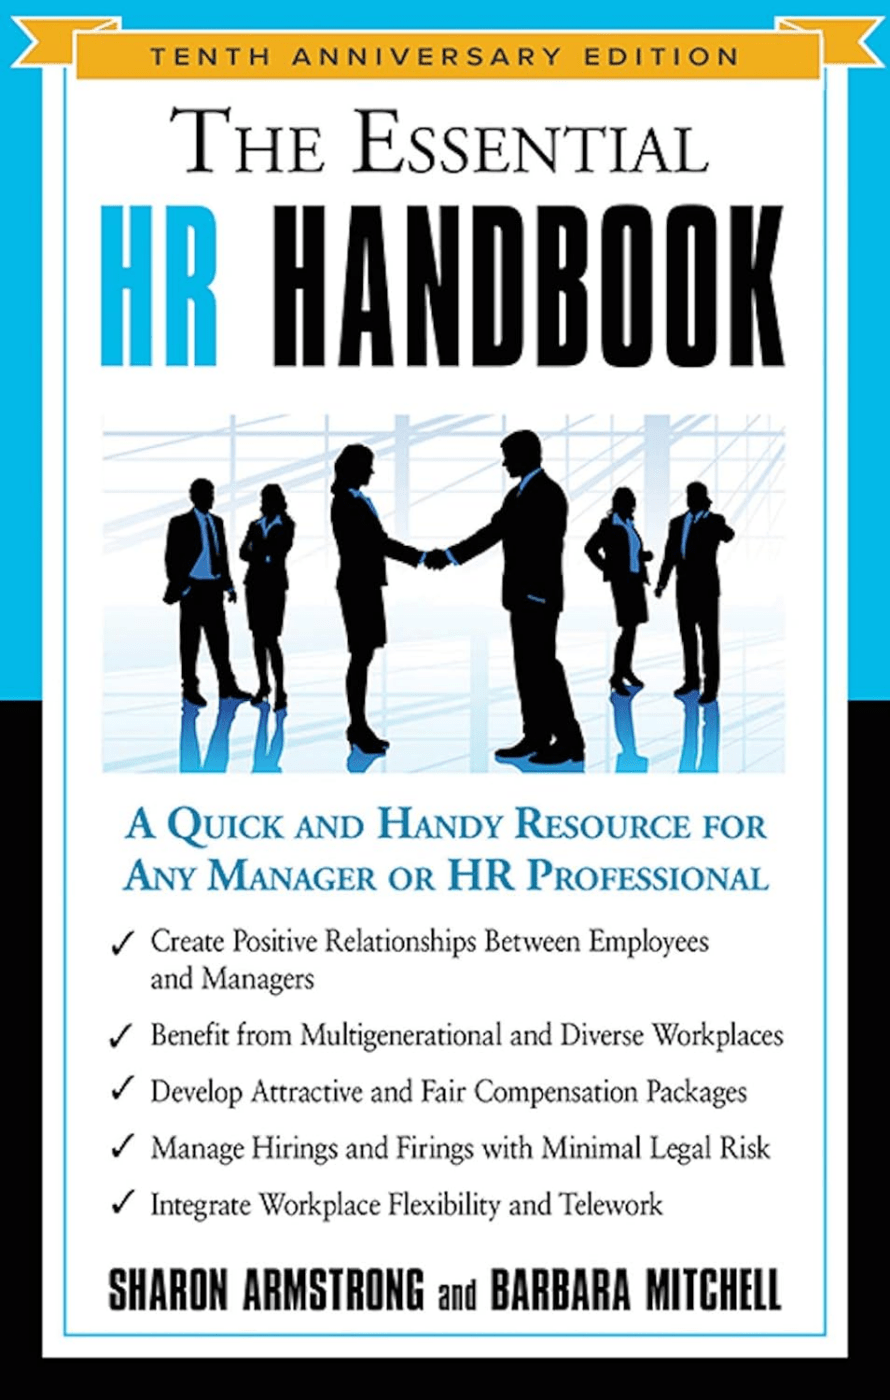 2. The Essential HR Handbook (10th Anniversary Edition) by Sharon Armstrong and Barbara Mitchell